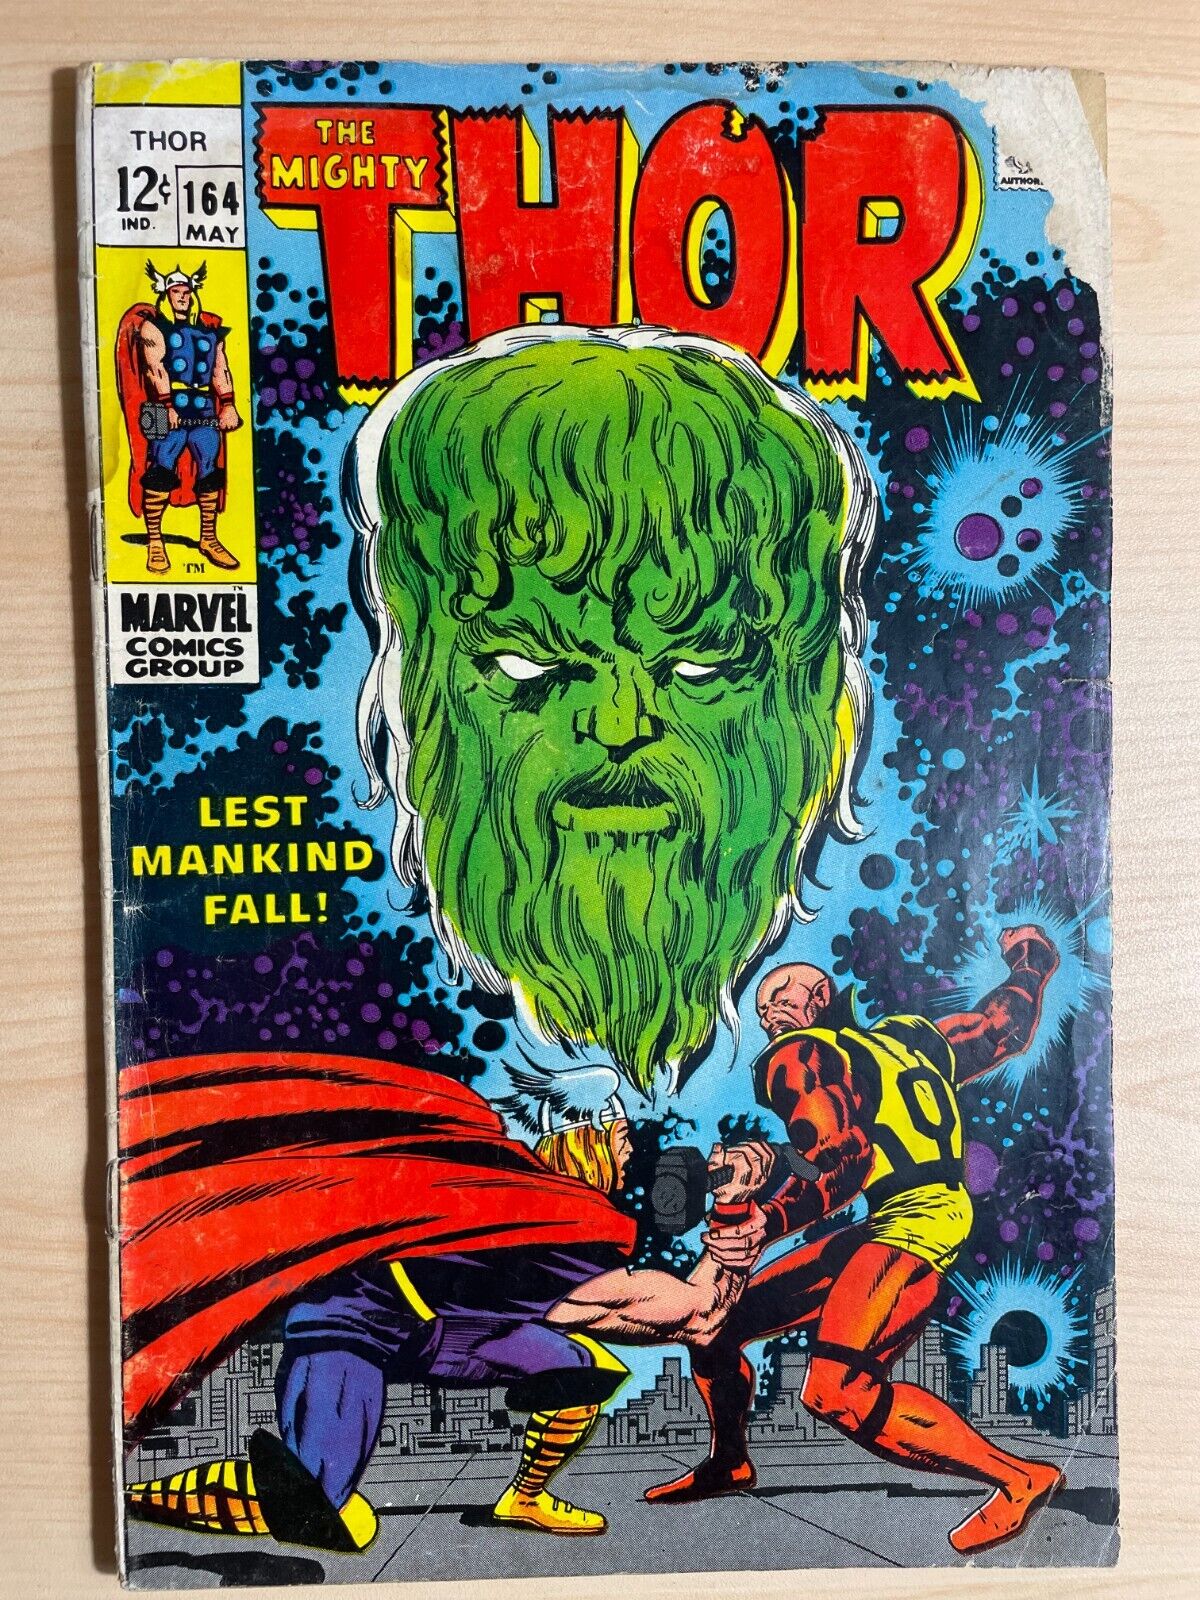 THOR #164, The Mighty Thor 1969